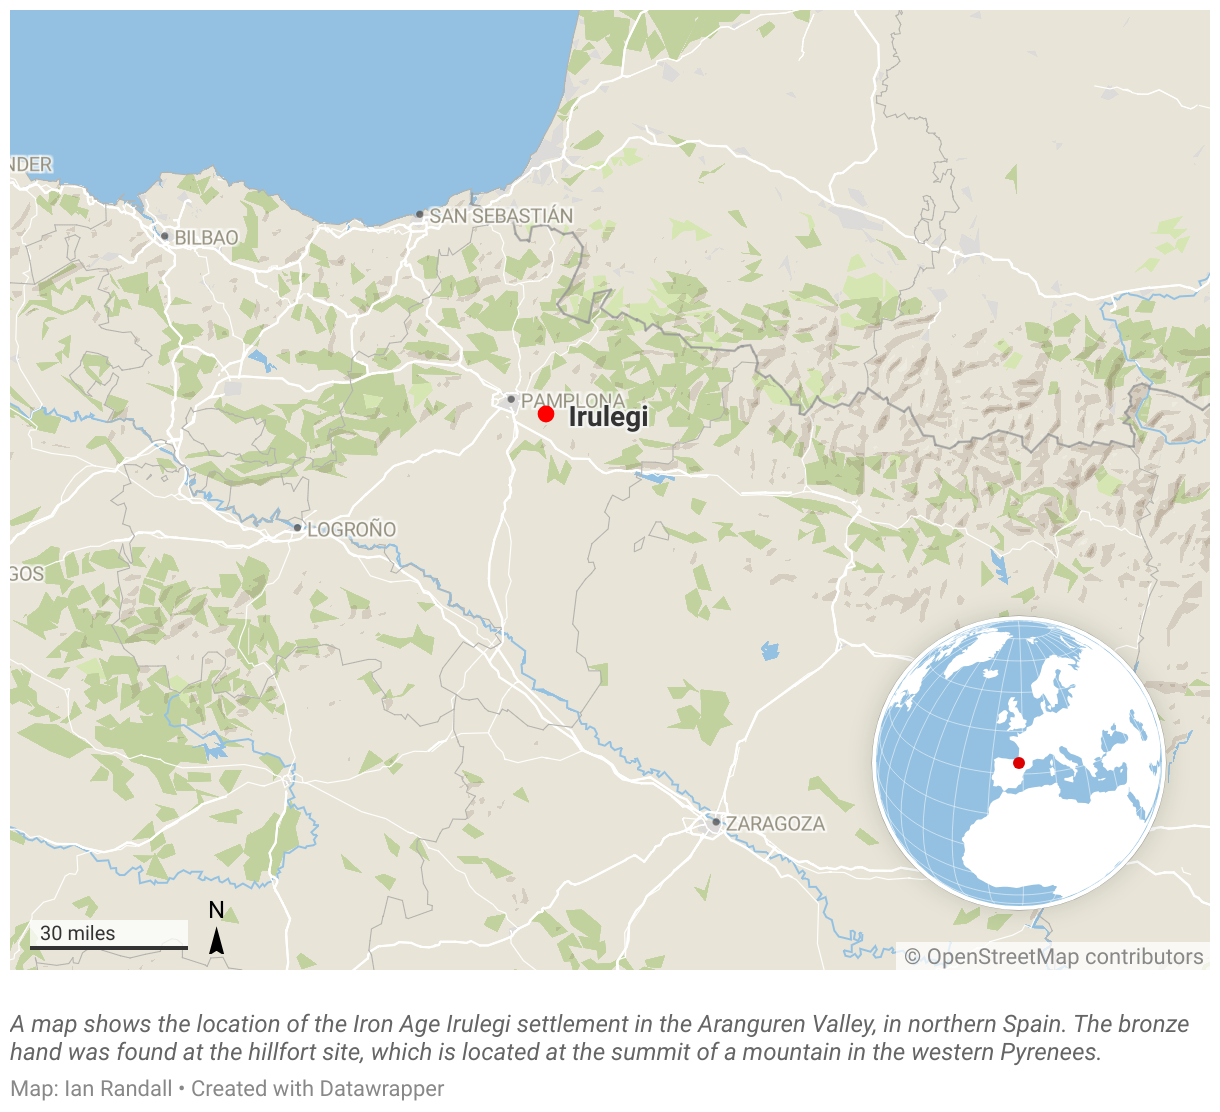 A map shows the location of the Iron Age Irulegi settlement in the Aranguren Valley, in northern Spain.